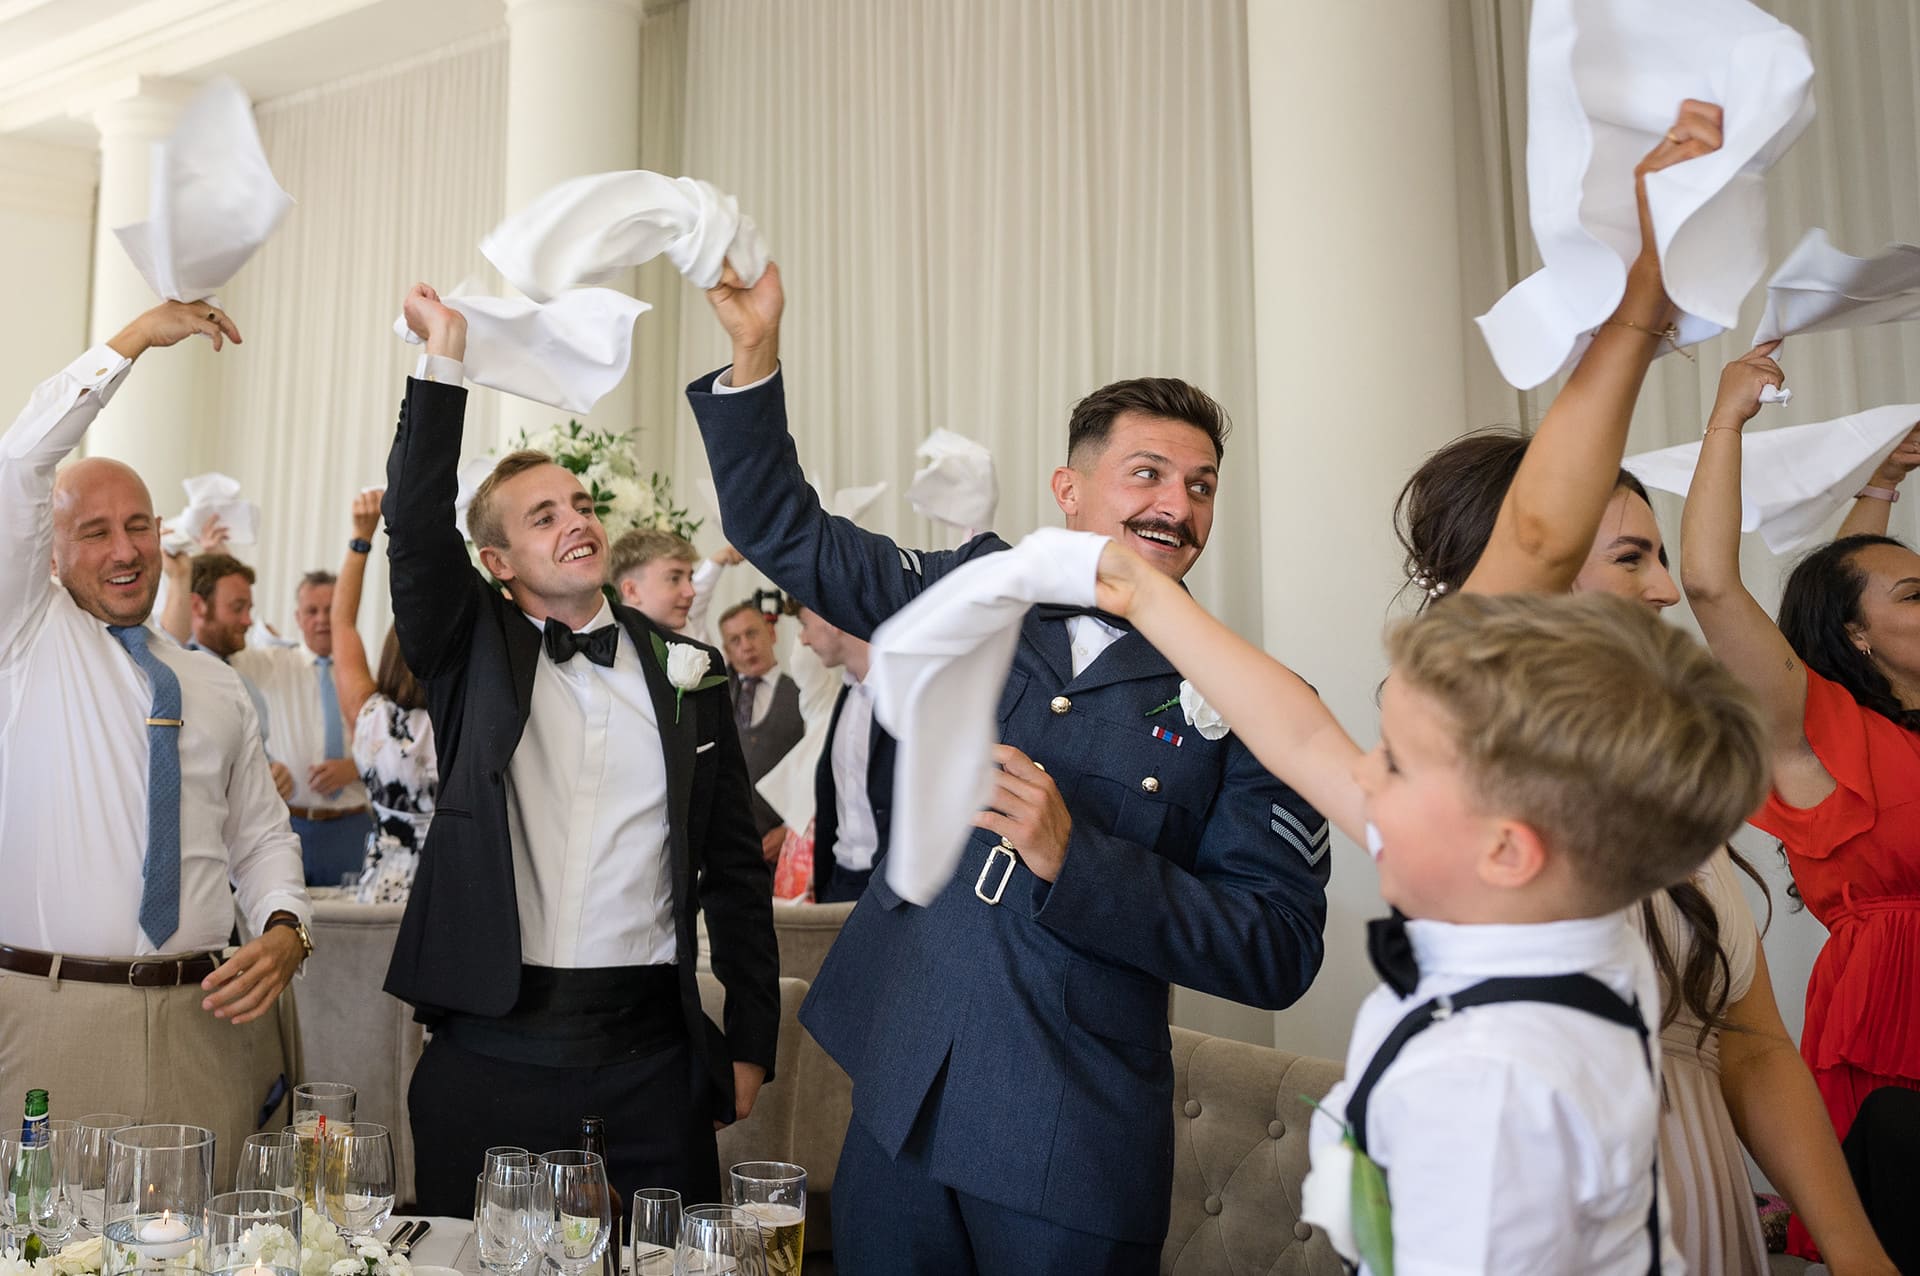 Wedding guests waving their napkins in the air as the bride and groom are announced in for the wedding breakfast